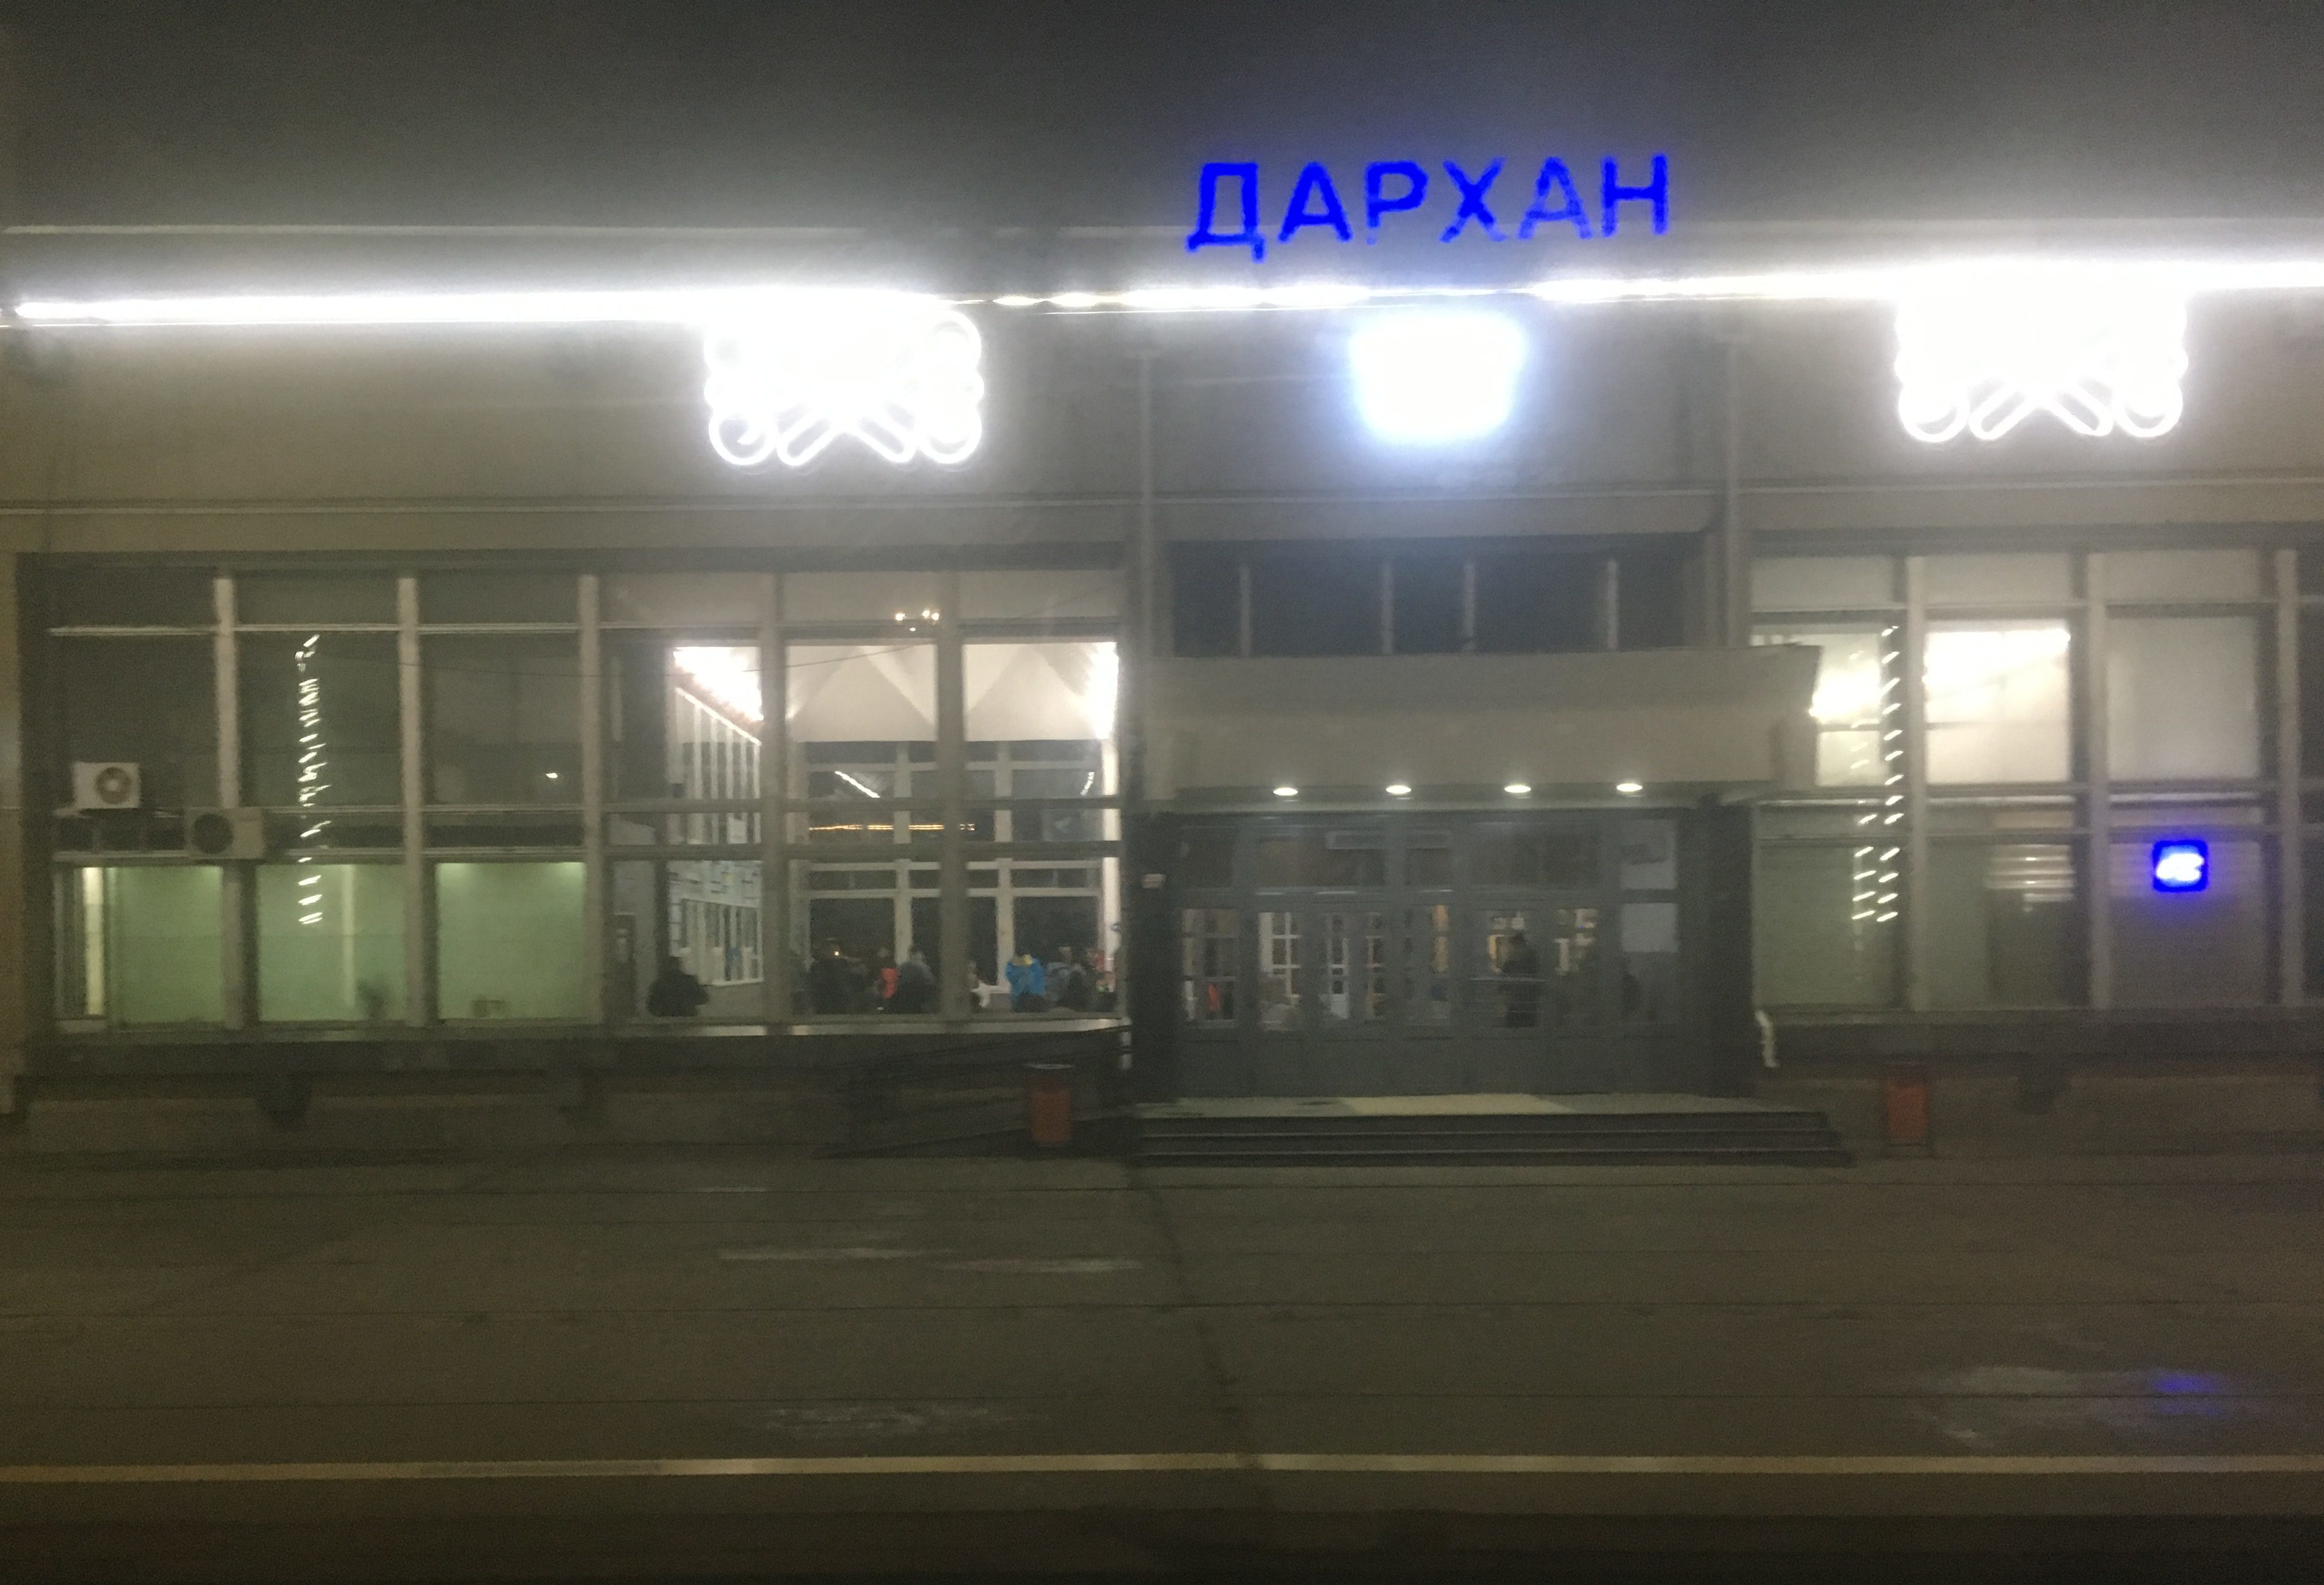 Darkhan Station in the middle of the night